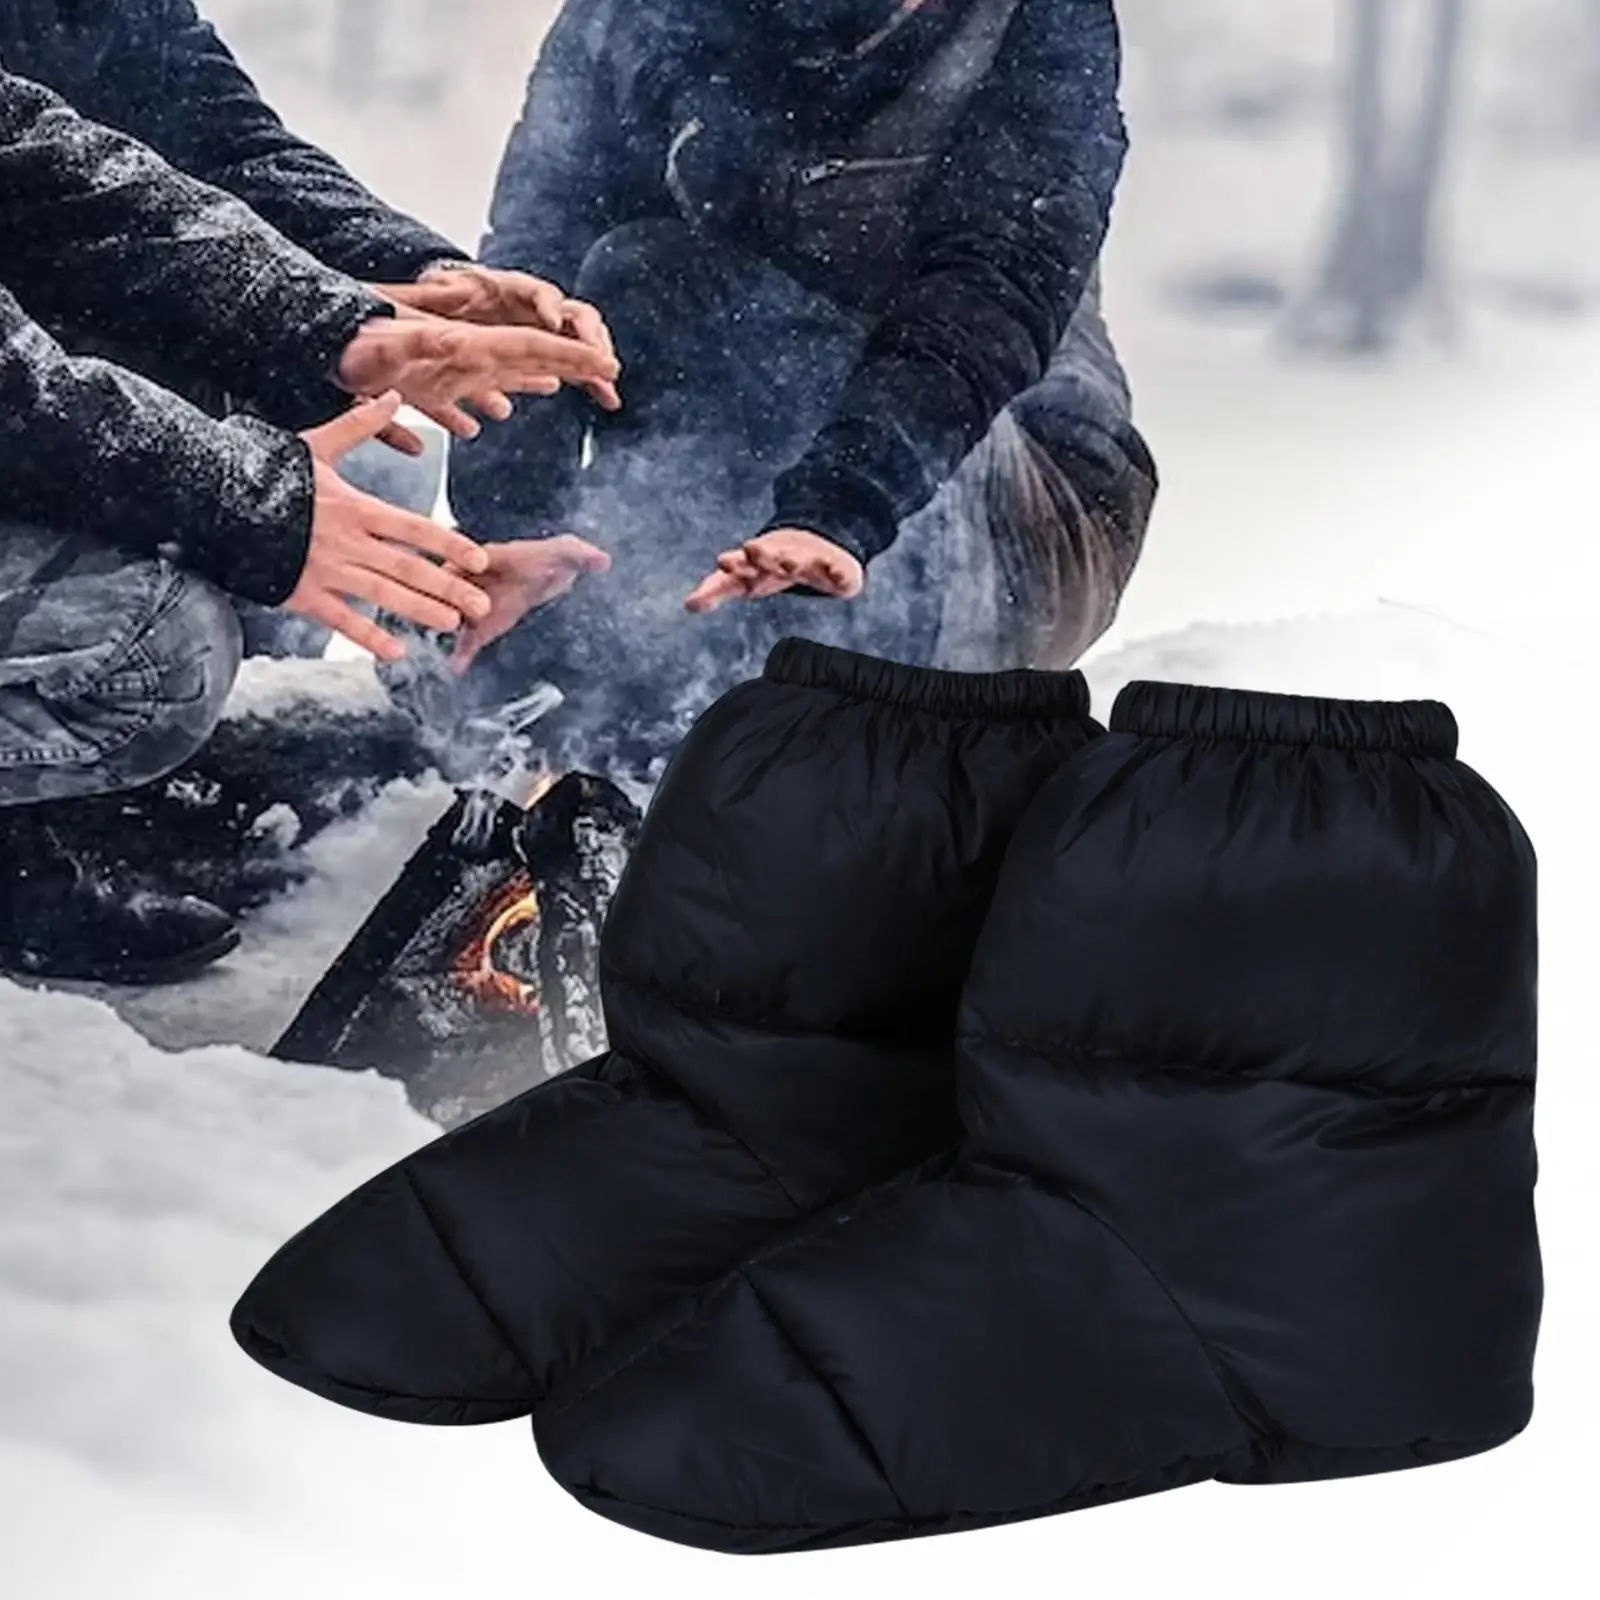 1 Pair Winter Down Slippers Bootie Shoes Ultralight Women Men Ankle Snow Boots for Hiking Backpacking Fishing Camping Gift